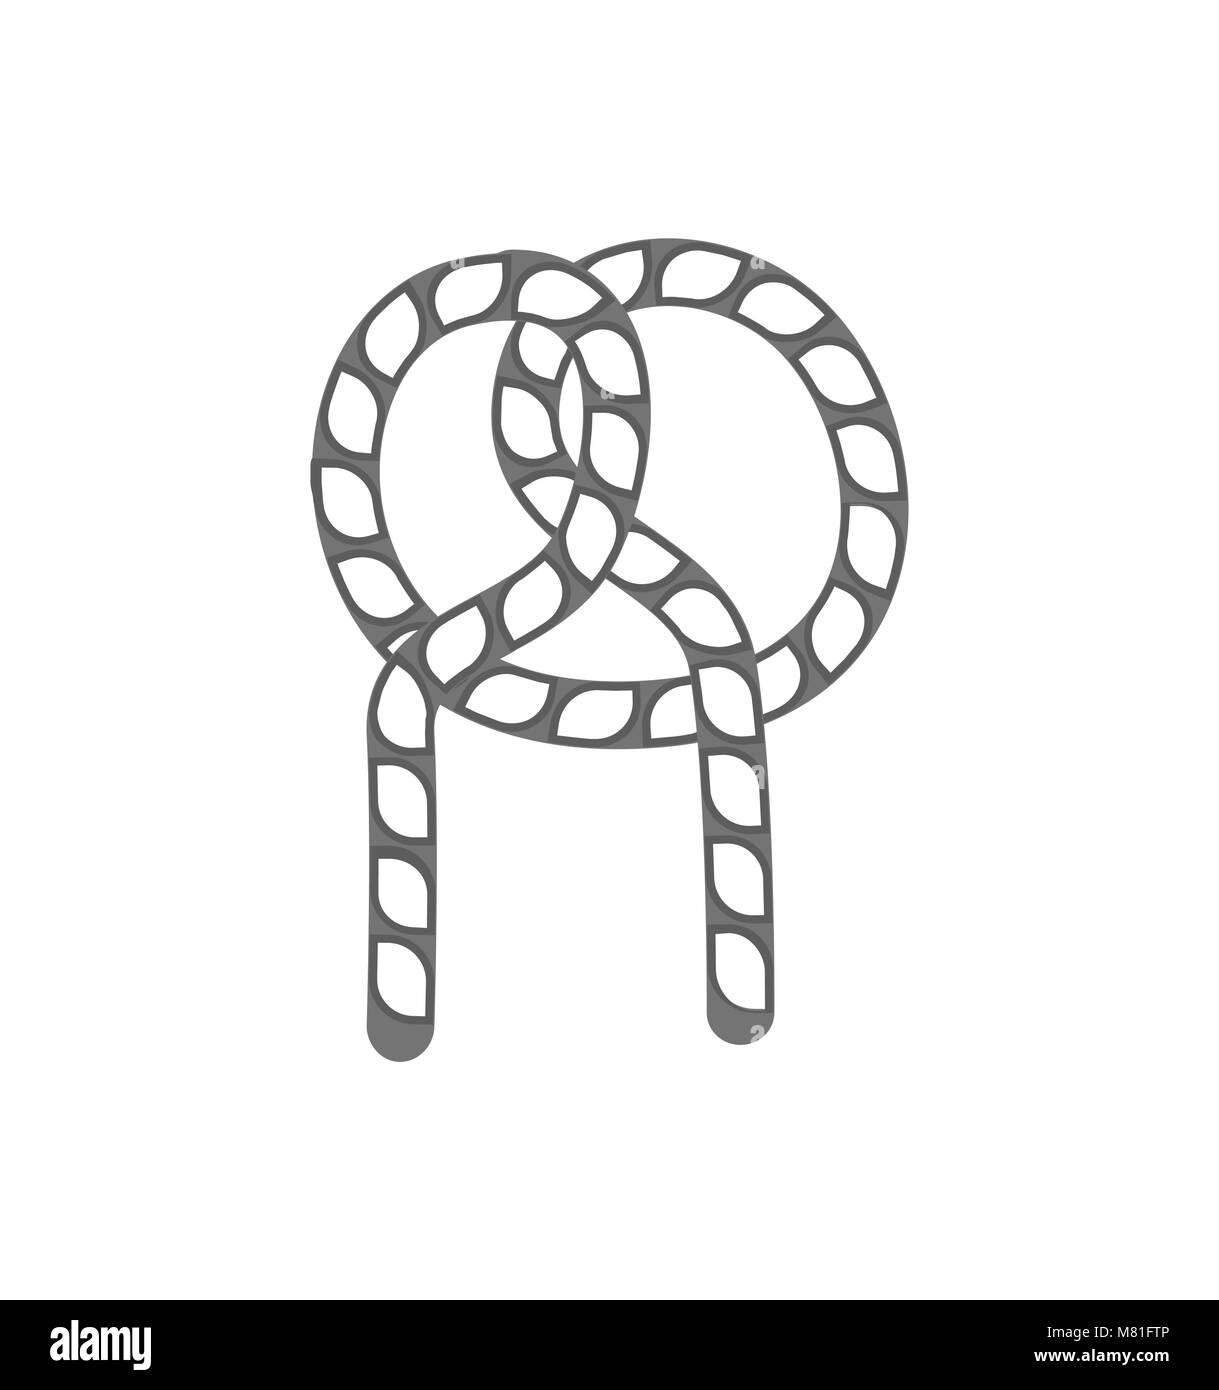 Rope knot outline isolated vector icon Stock Vector